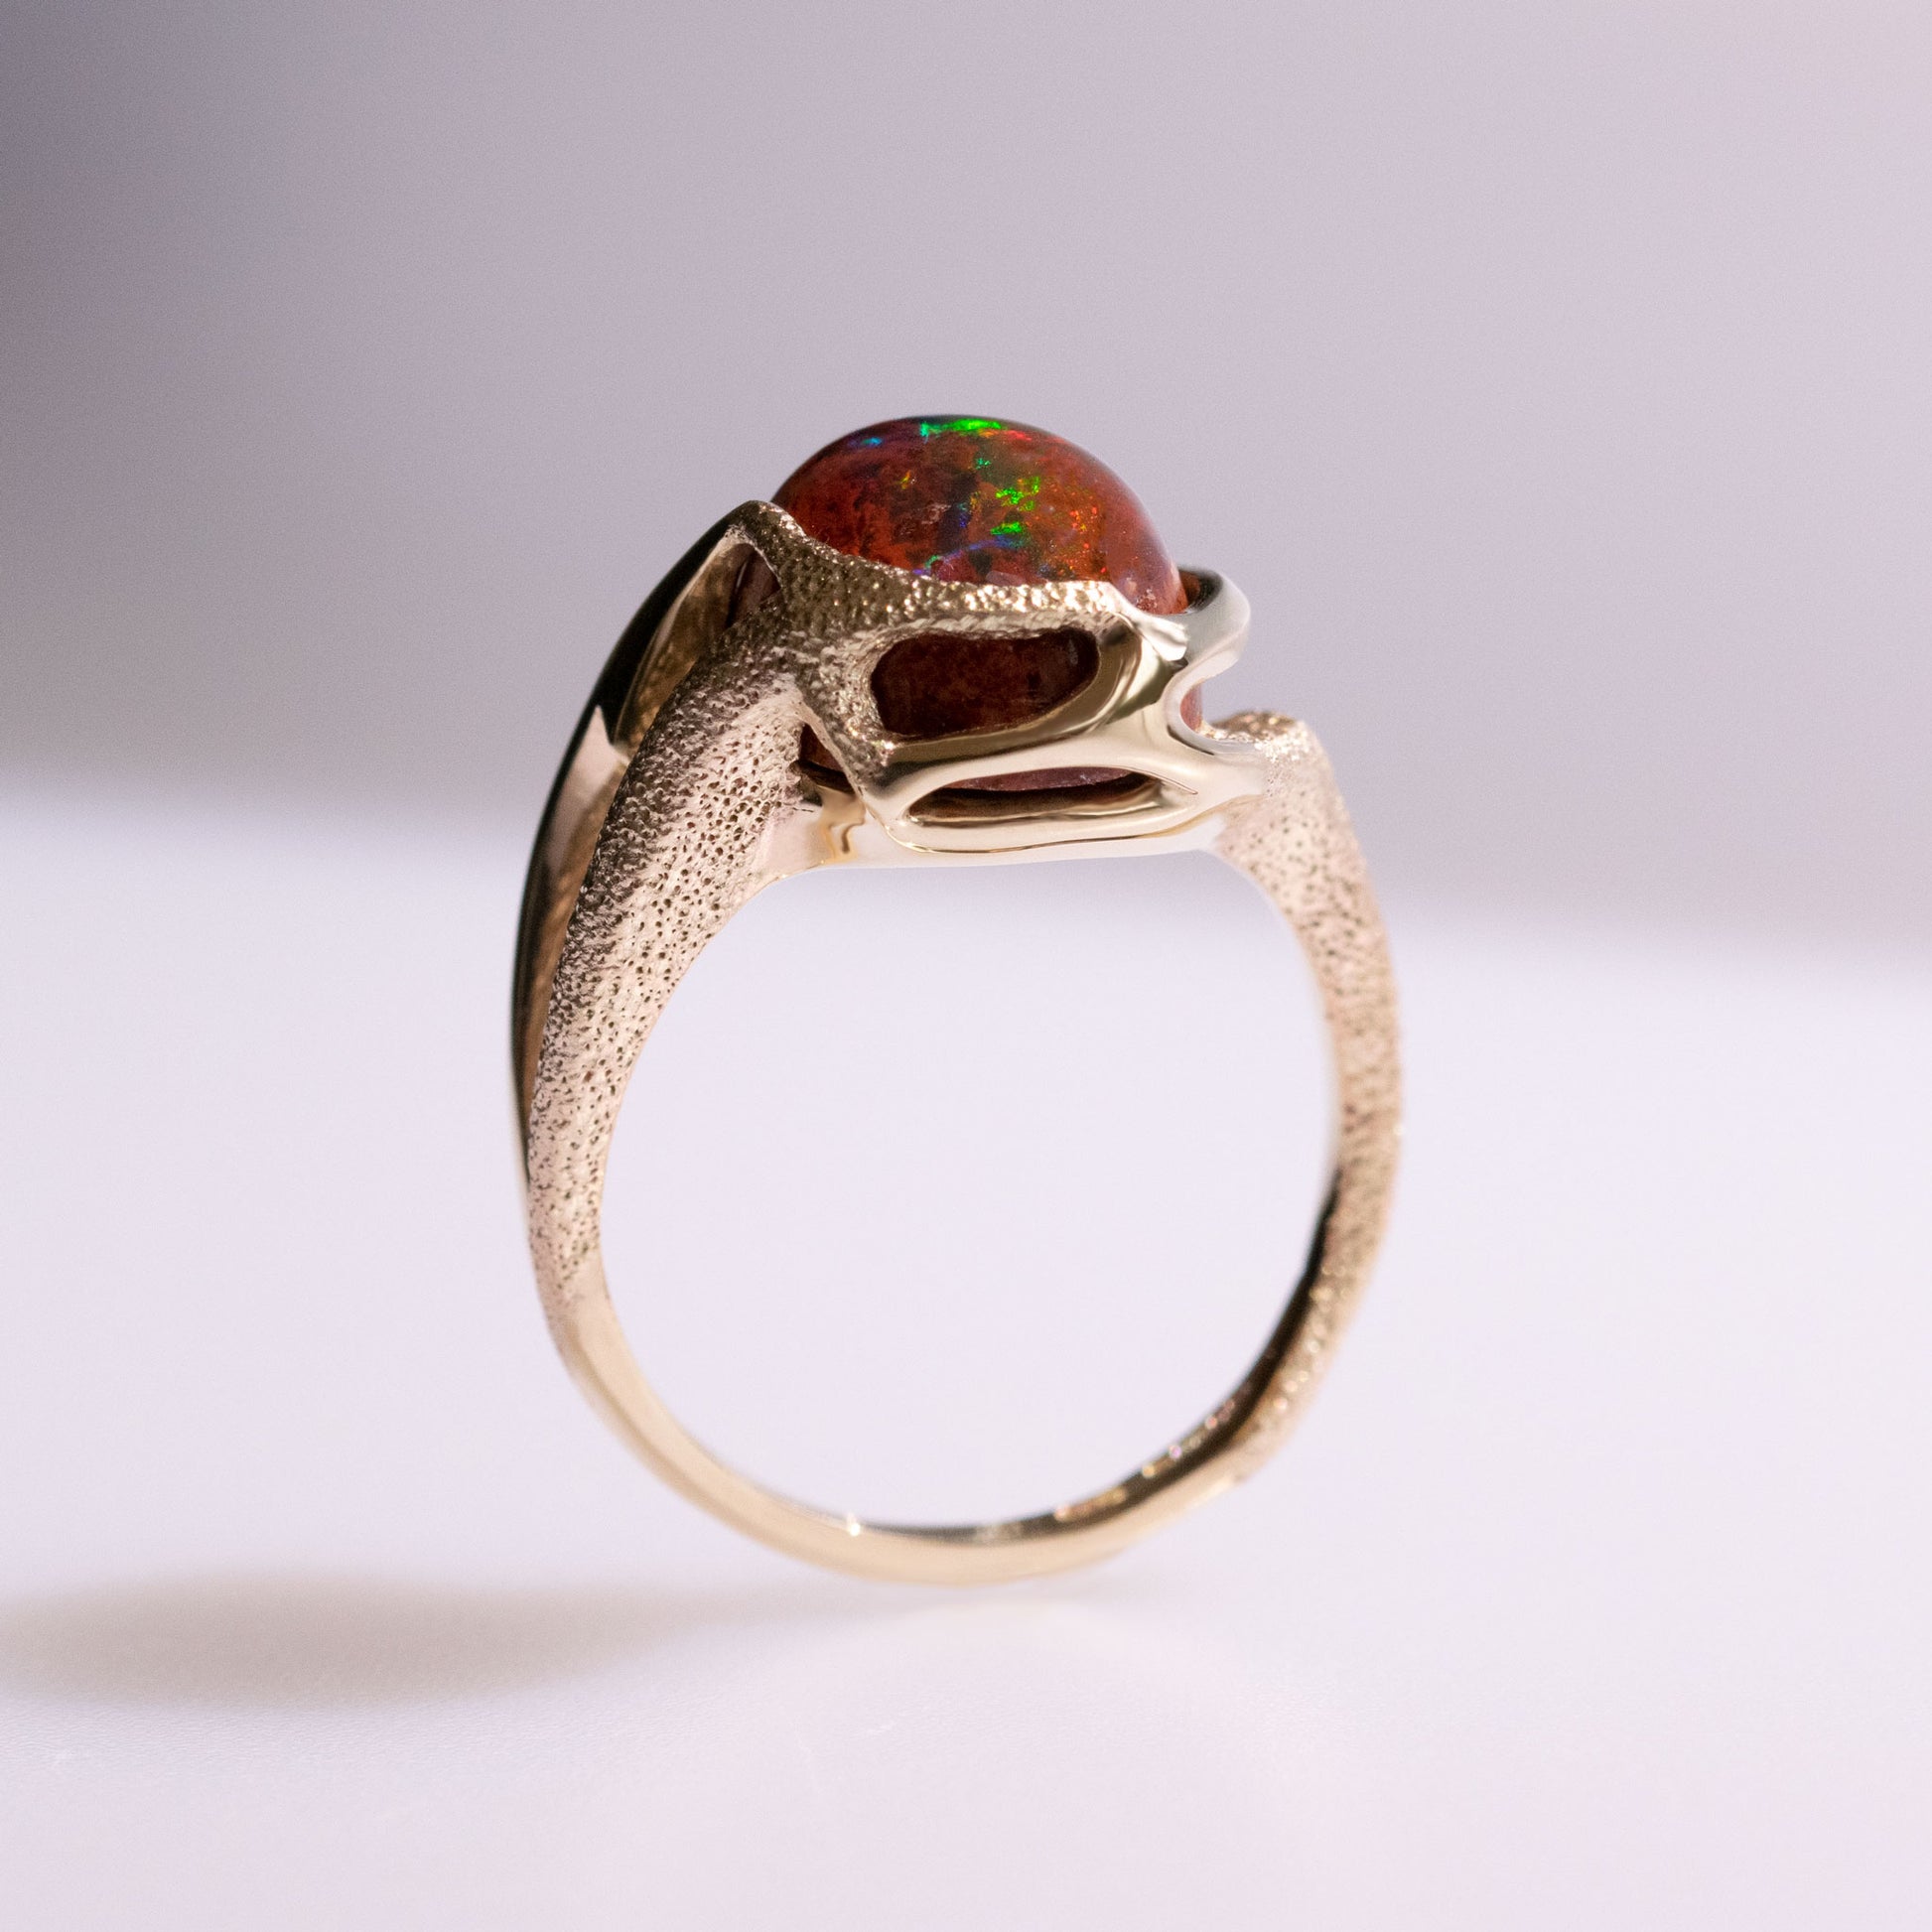 Orme-Brown Contemporary Fine Jewellery Ethical Statement ring in sustainable 9ct yellow gold and a Mexican fire opal Cabochon (TipToe)